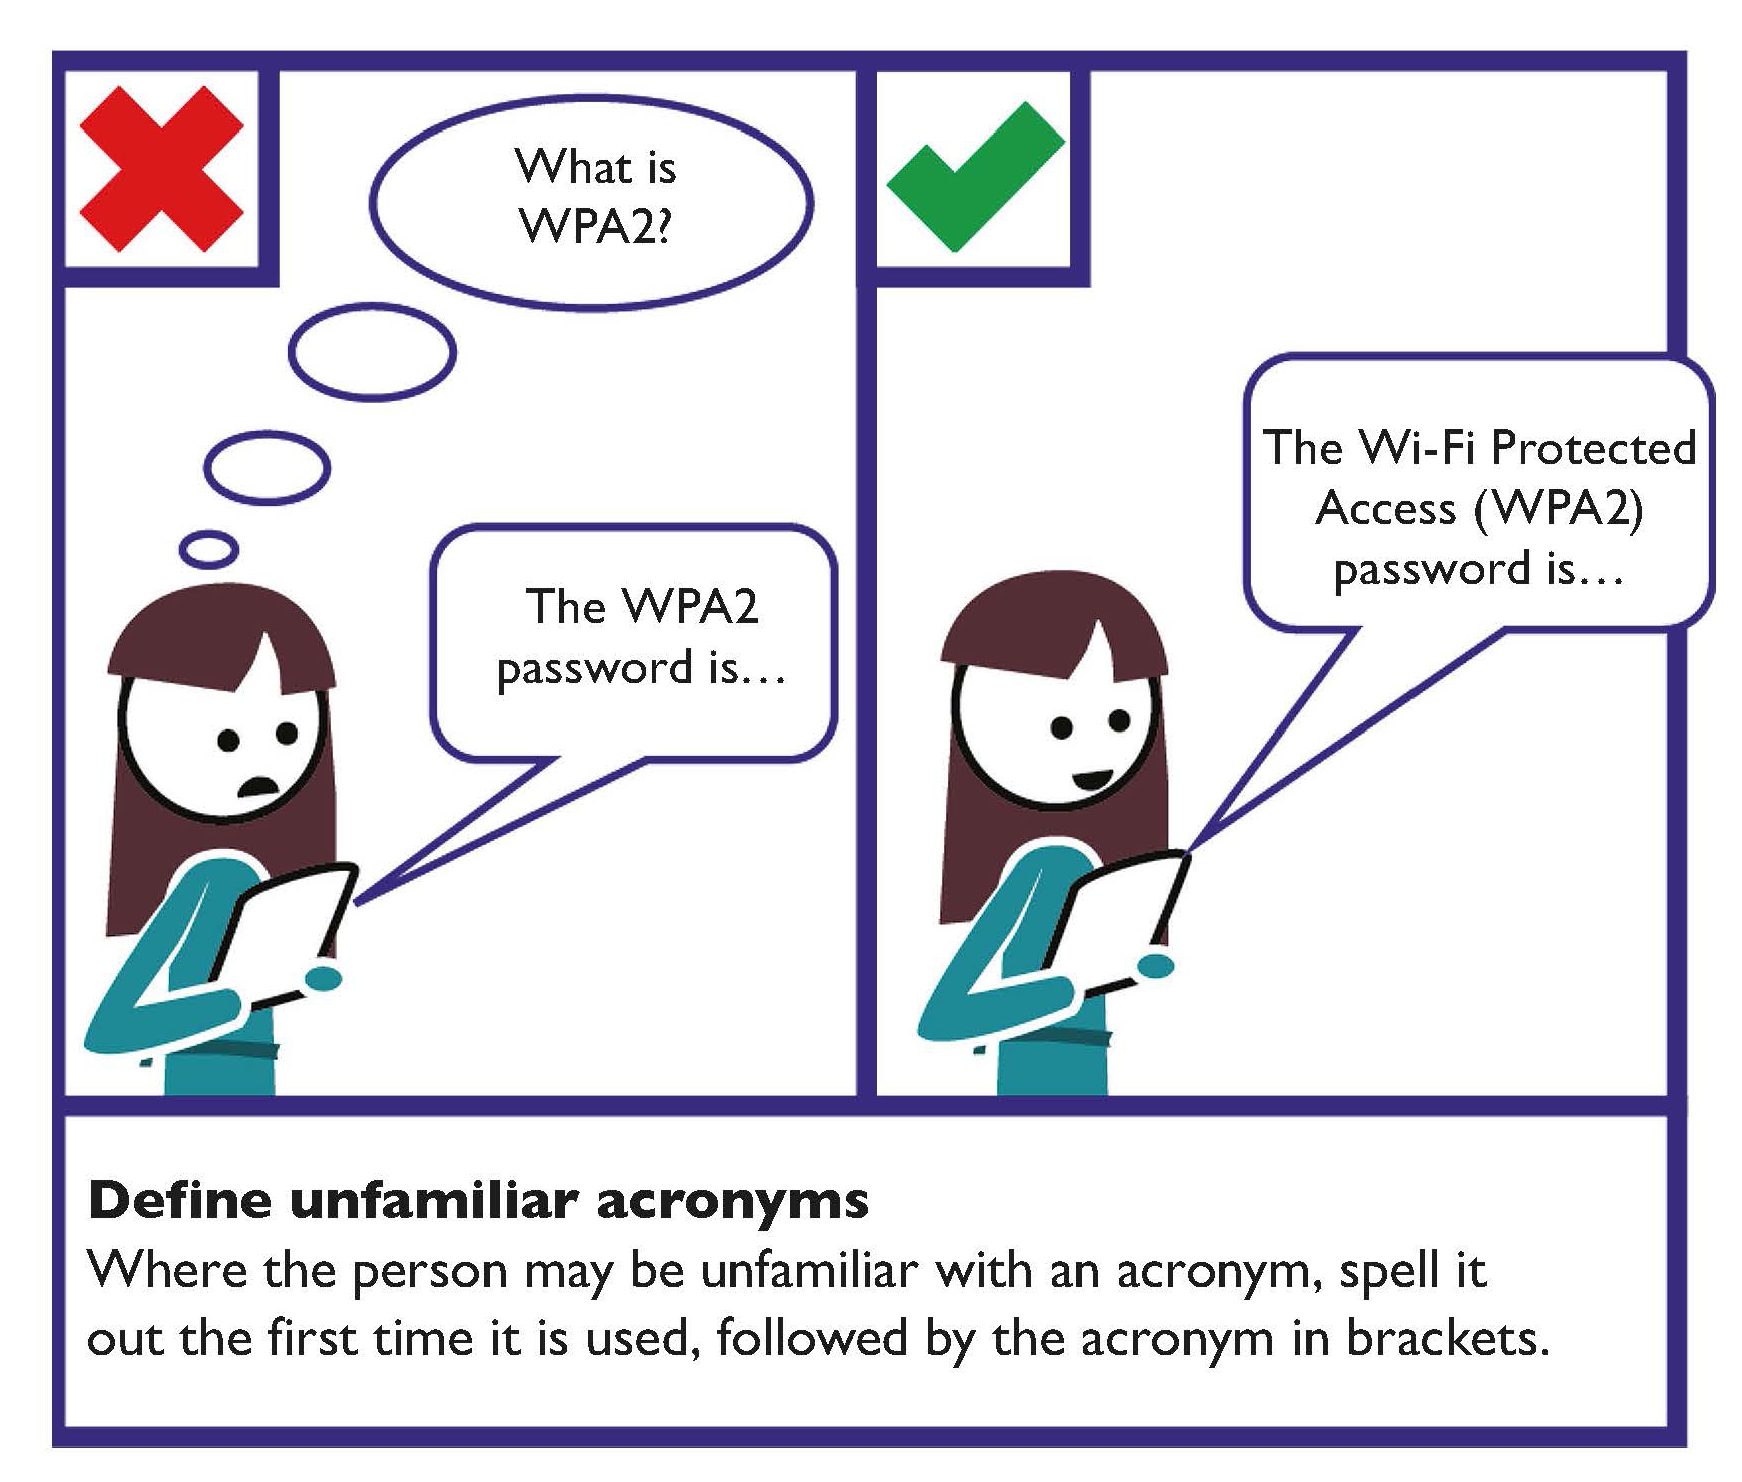 Example of how to define unfamiliar acronyms, spell it out the first time it is used, followed by the acronyms in brackets. For example instead of WPA2, use Wi-Fi protected Access (WPA2)